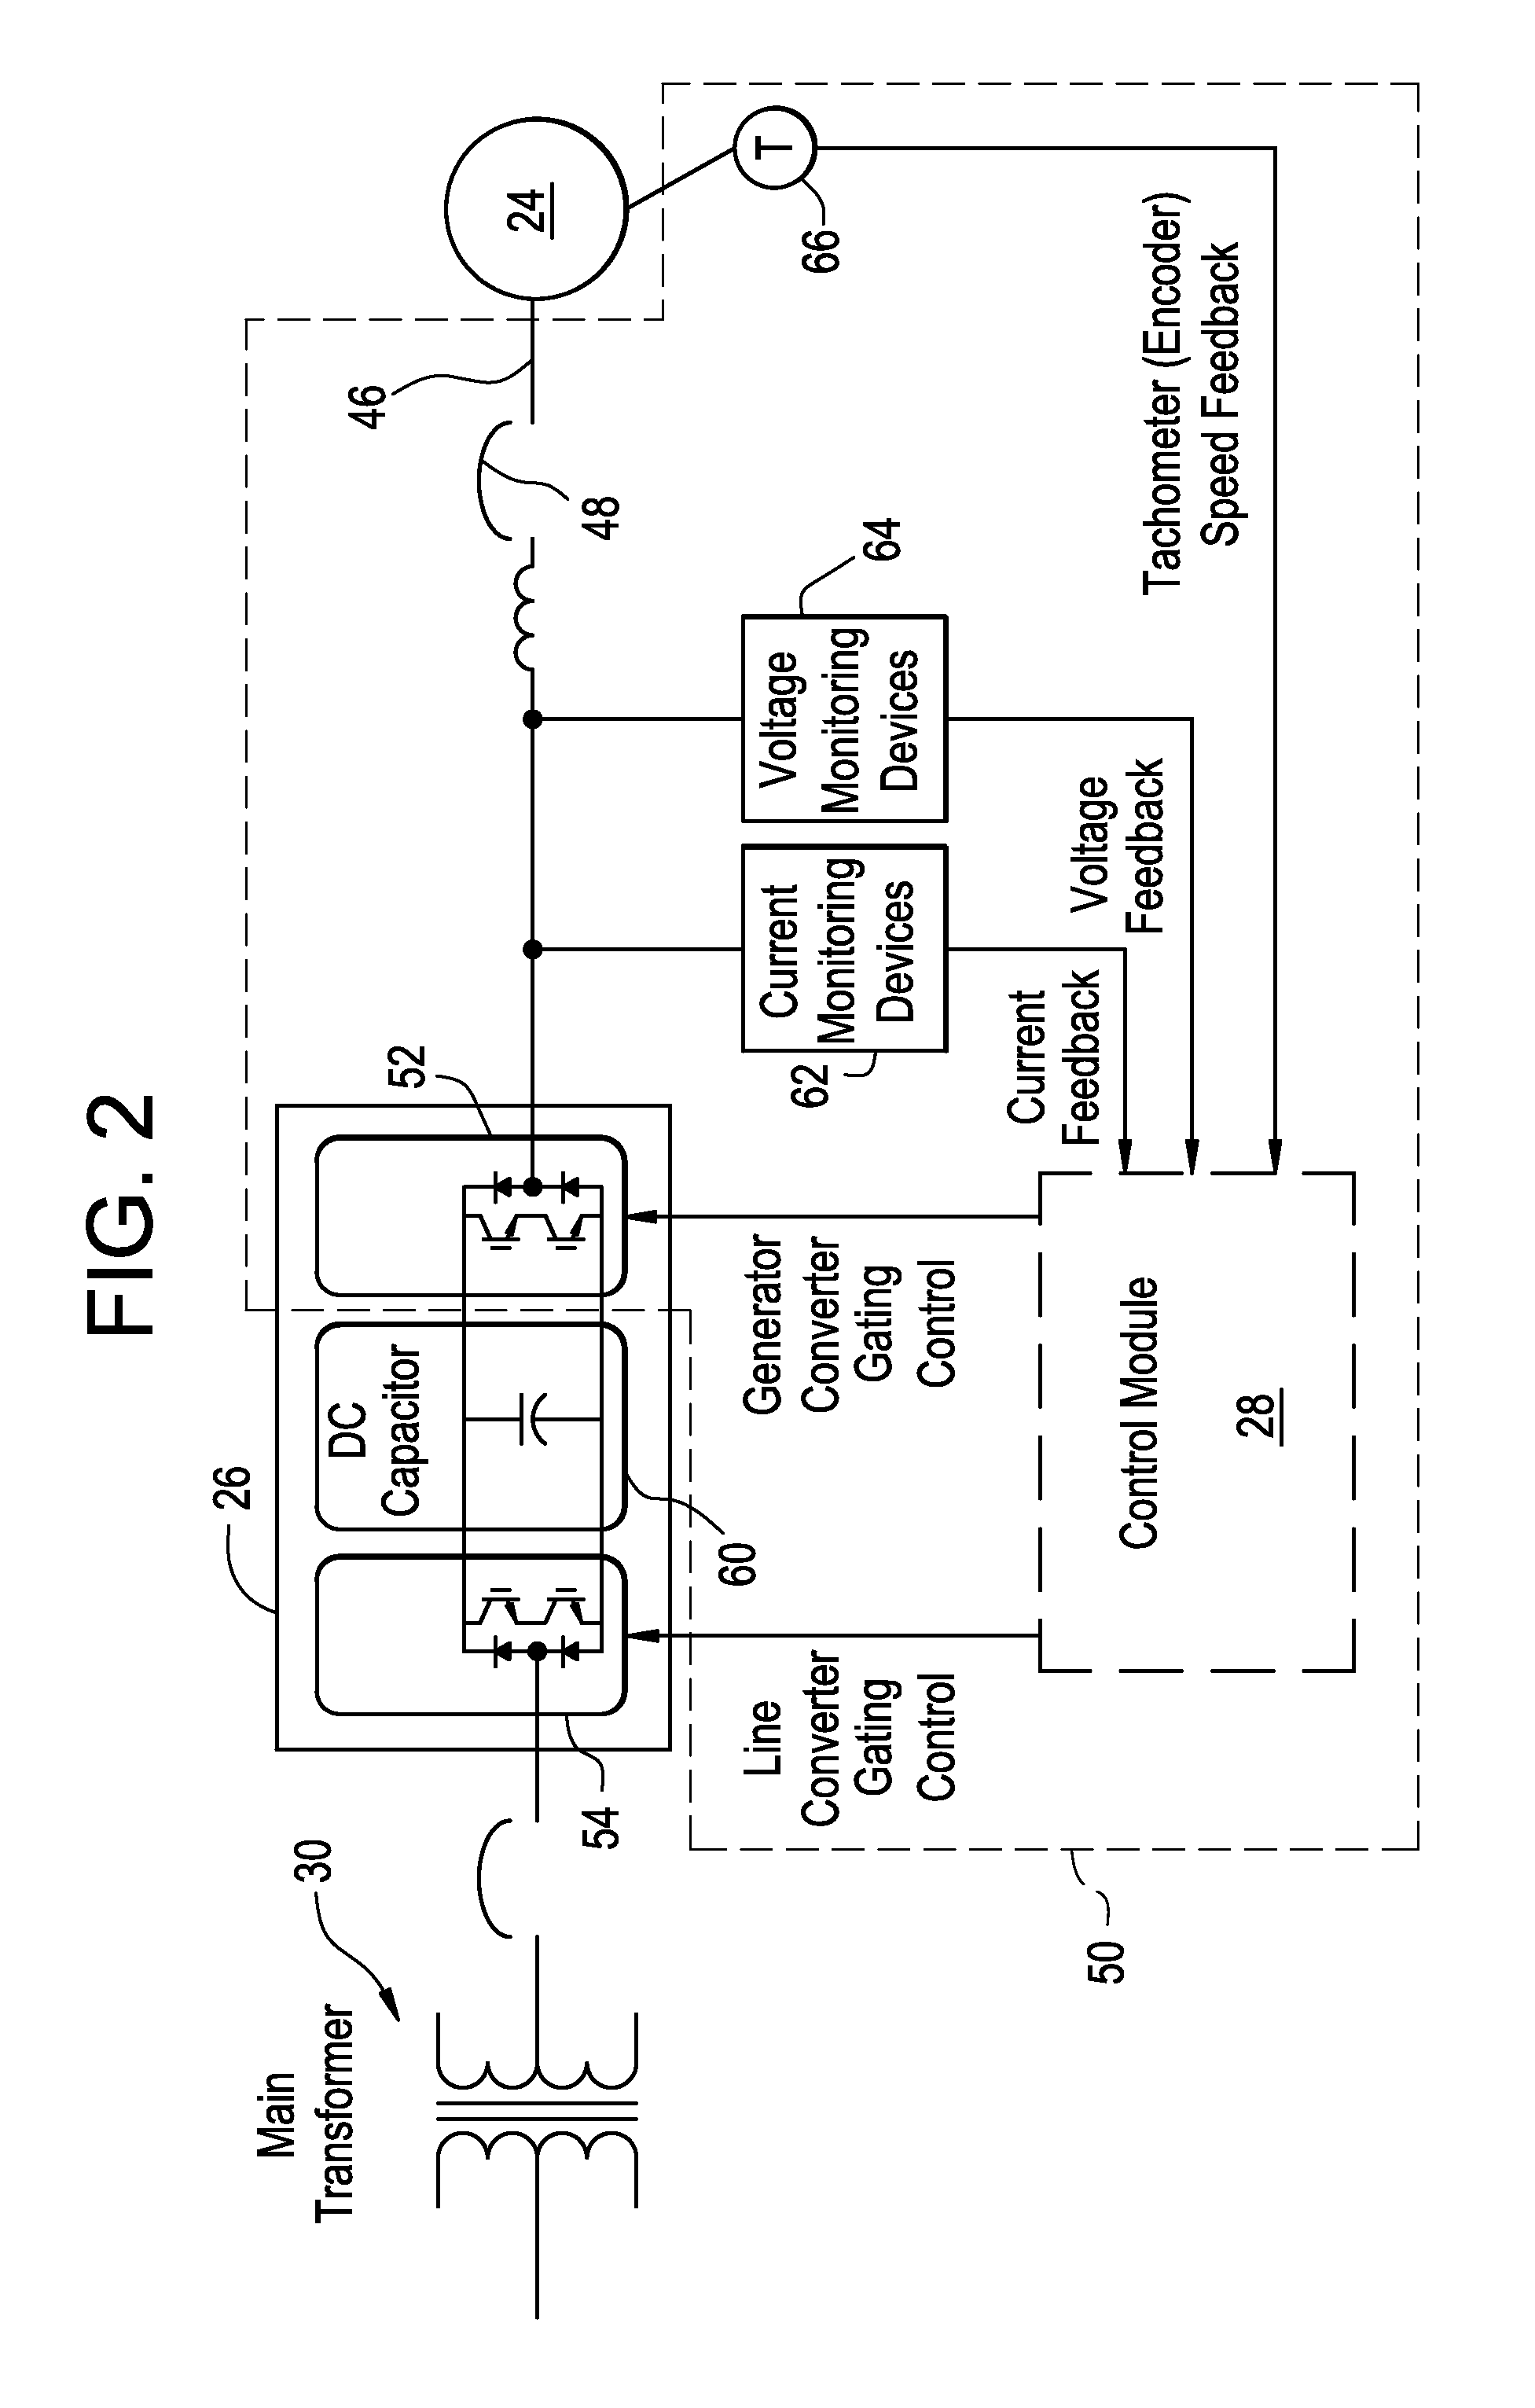 Fault detection system for a generator